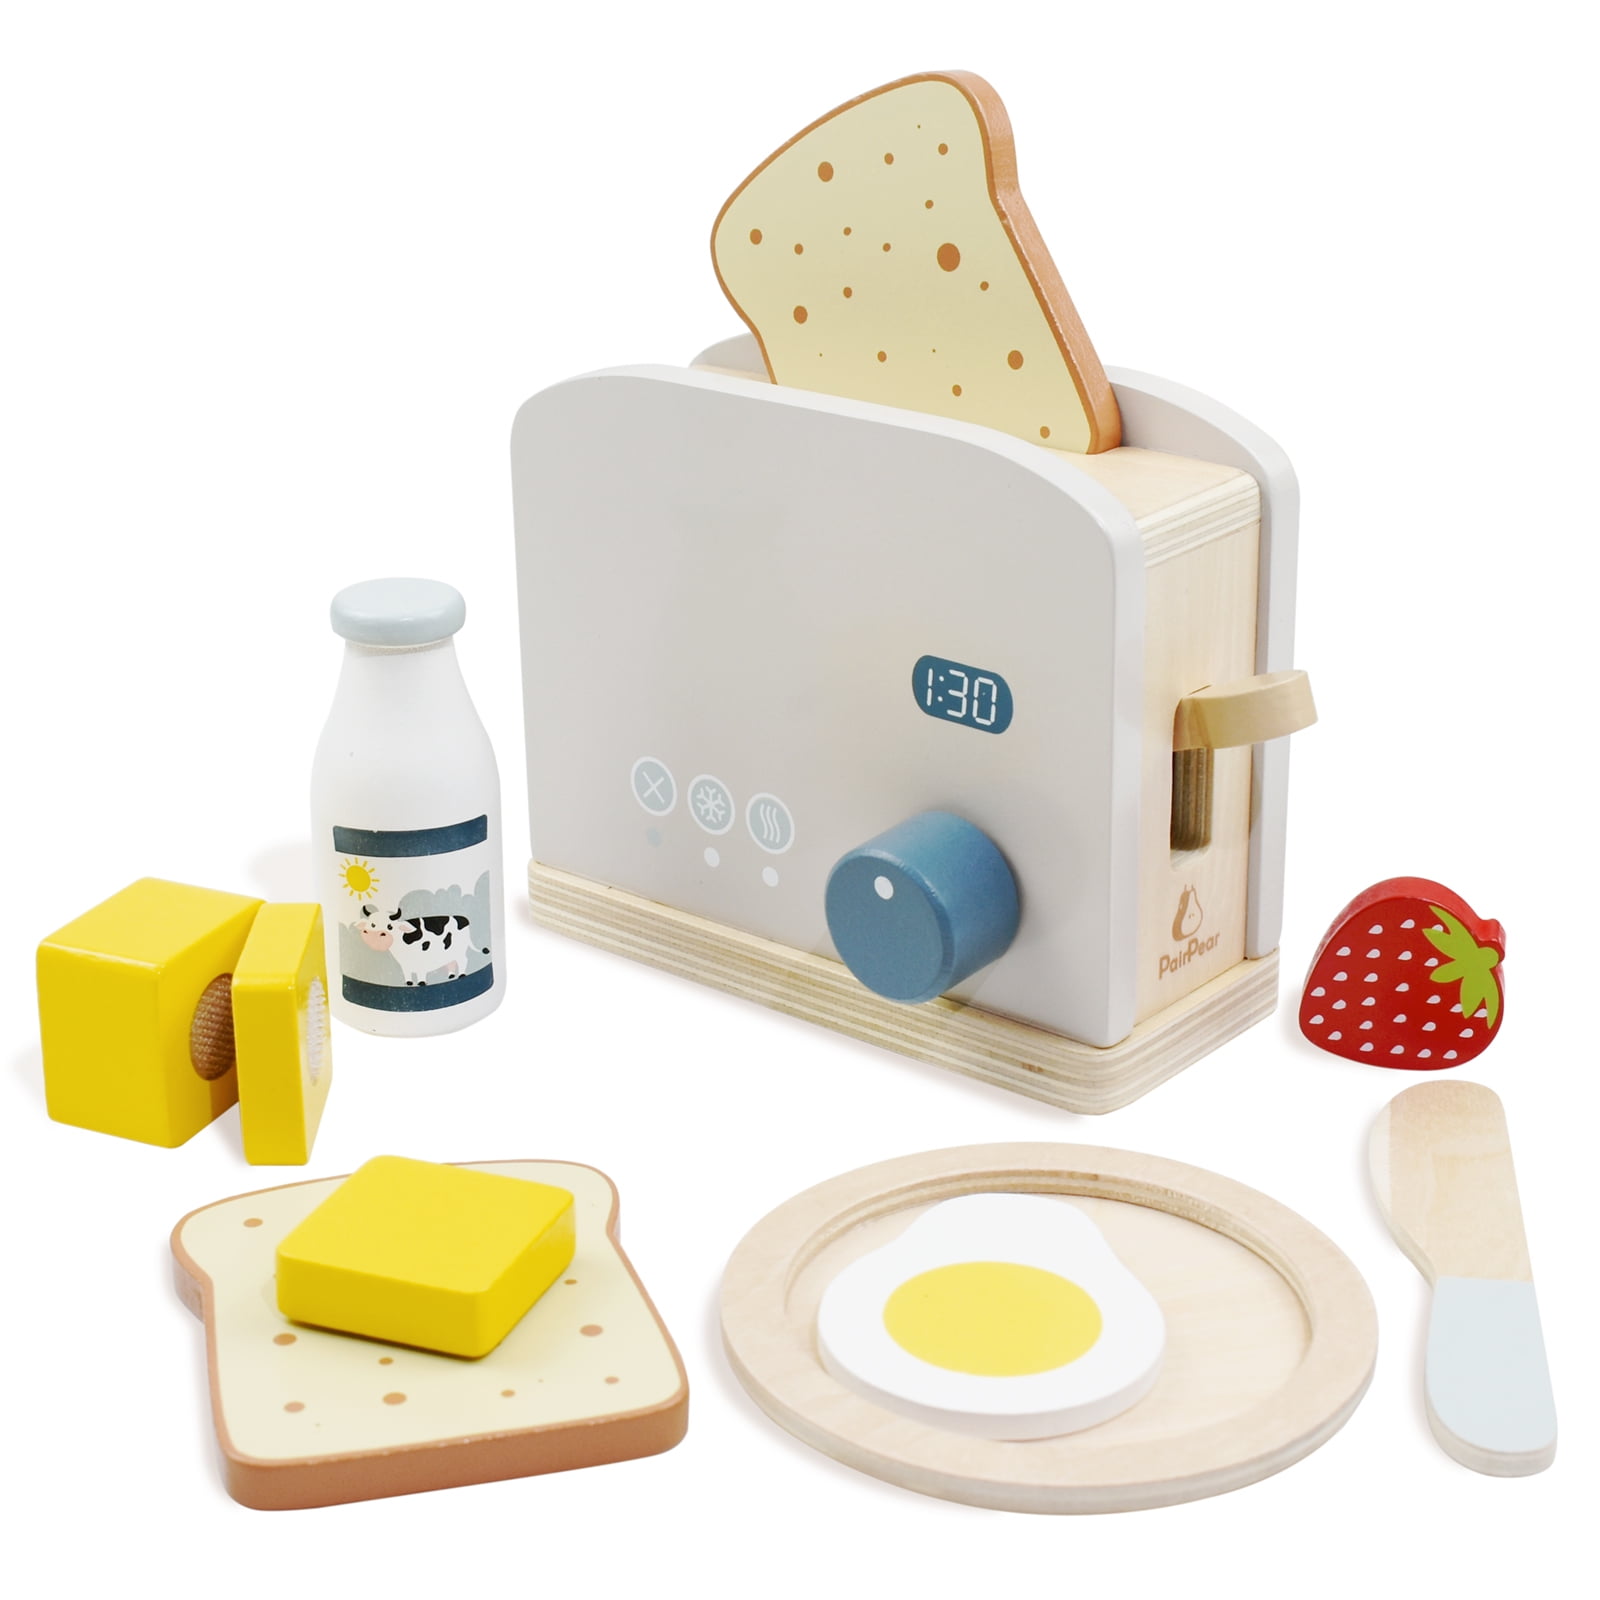 Airlab Wooden Pop-up Toaster Toy Play Kitchen Accessories Play Food Bread,  Butter, Poached Egg Cutting Pretend Toys for 3 4 5 Year Old Toddlers Boys